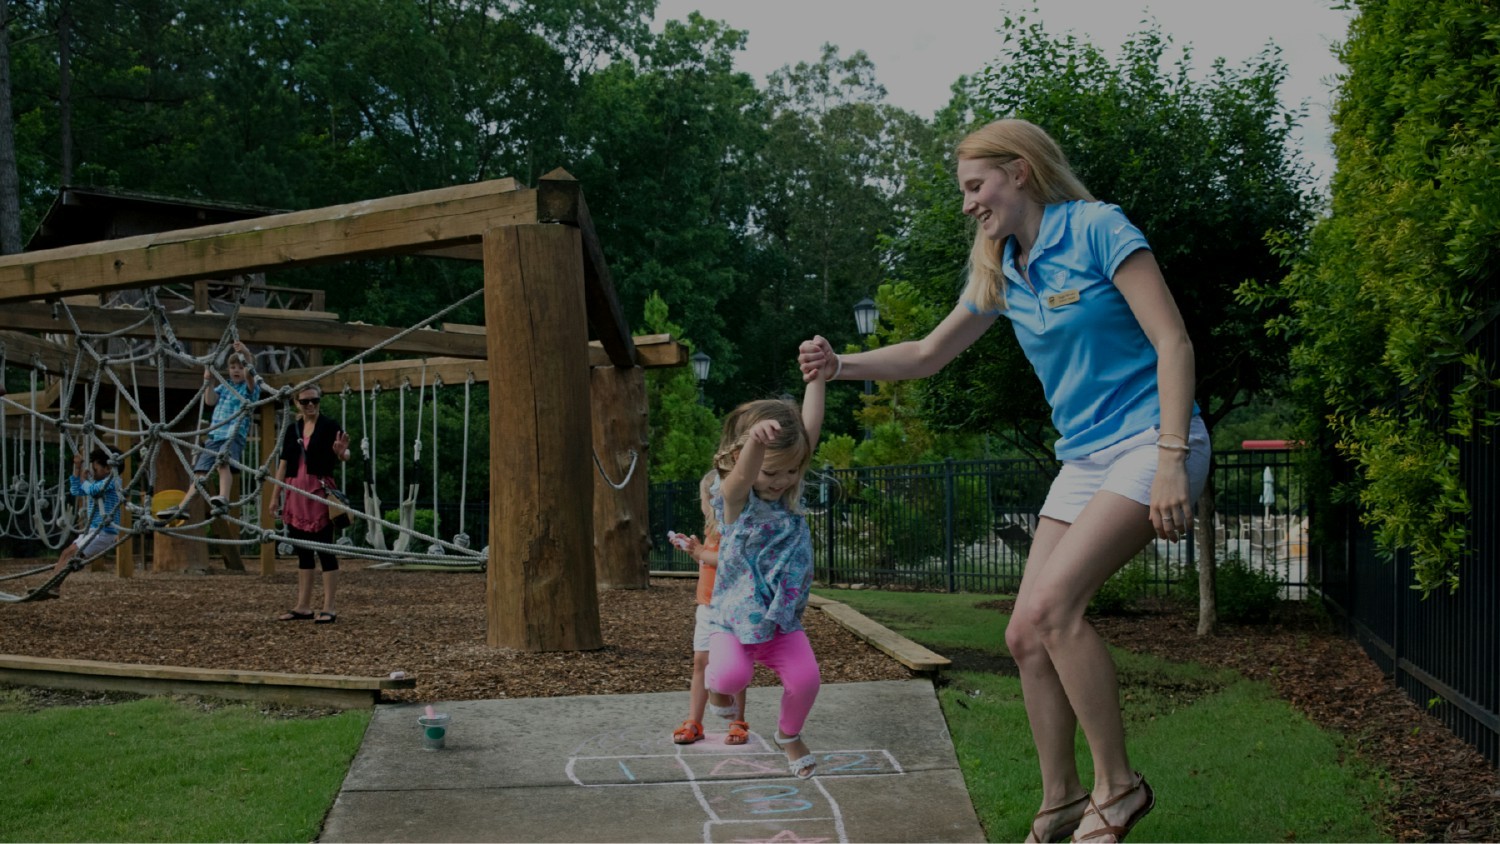 A Toll Brothers employee interacting with a homeowner’s child at a community’s playground